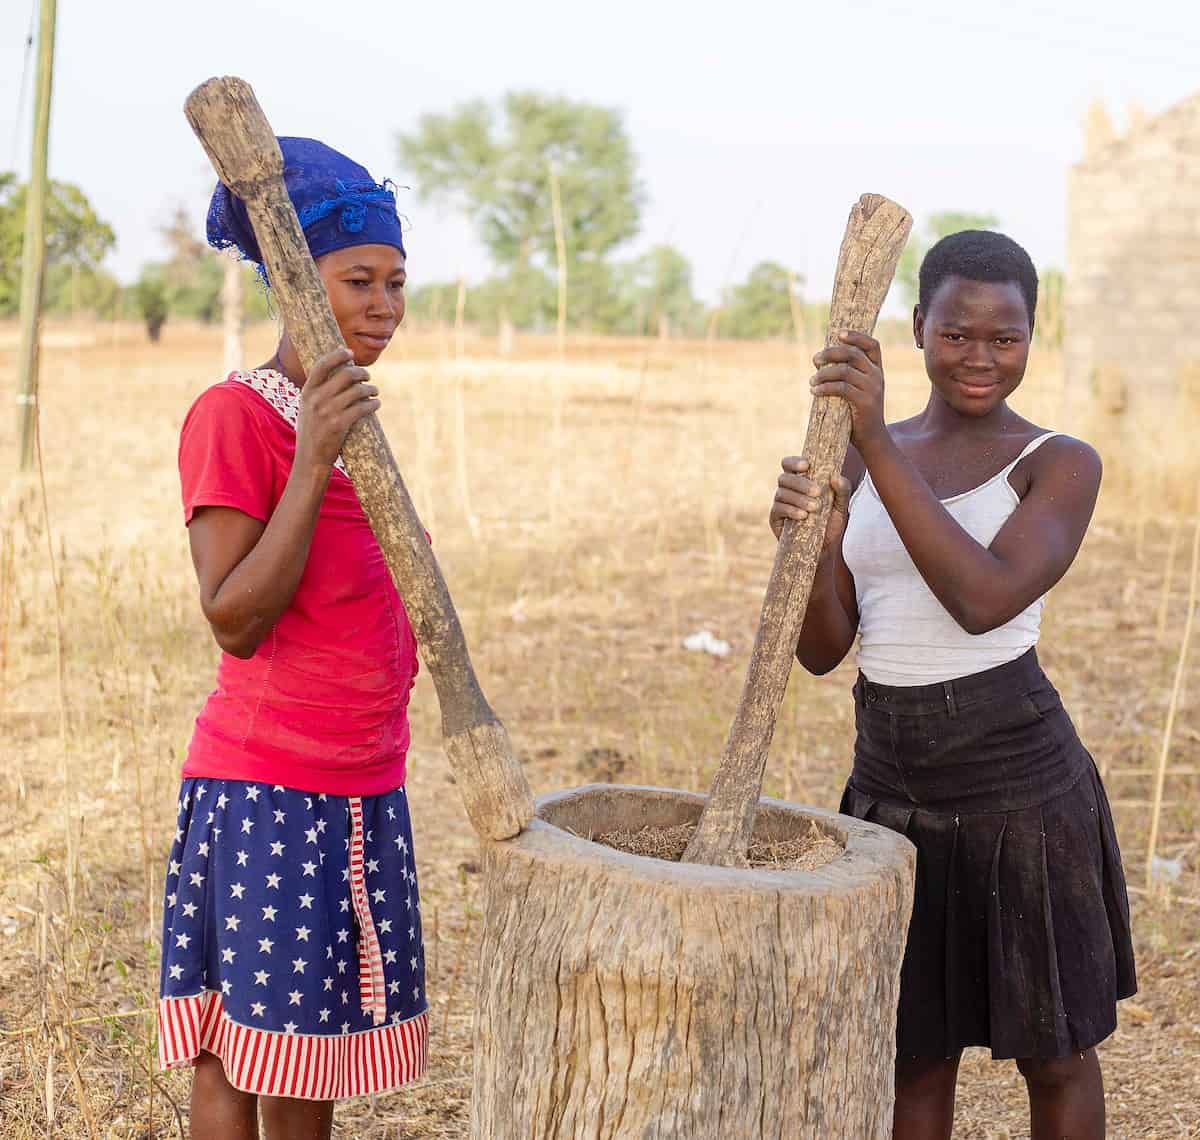 haitian Millet - featured a couple of women holding a wooden pole in a field